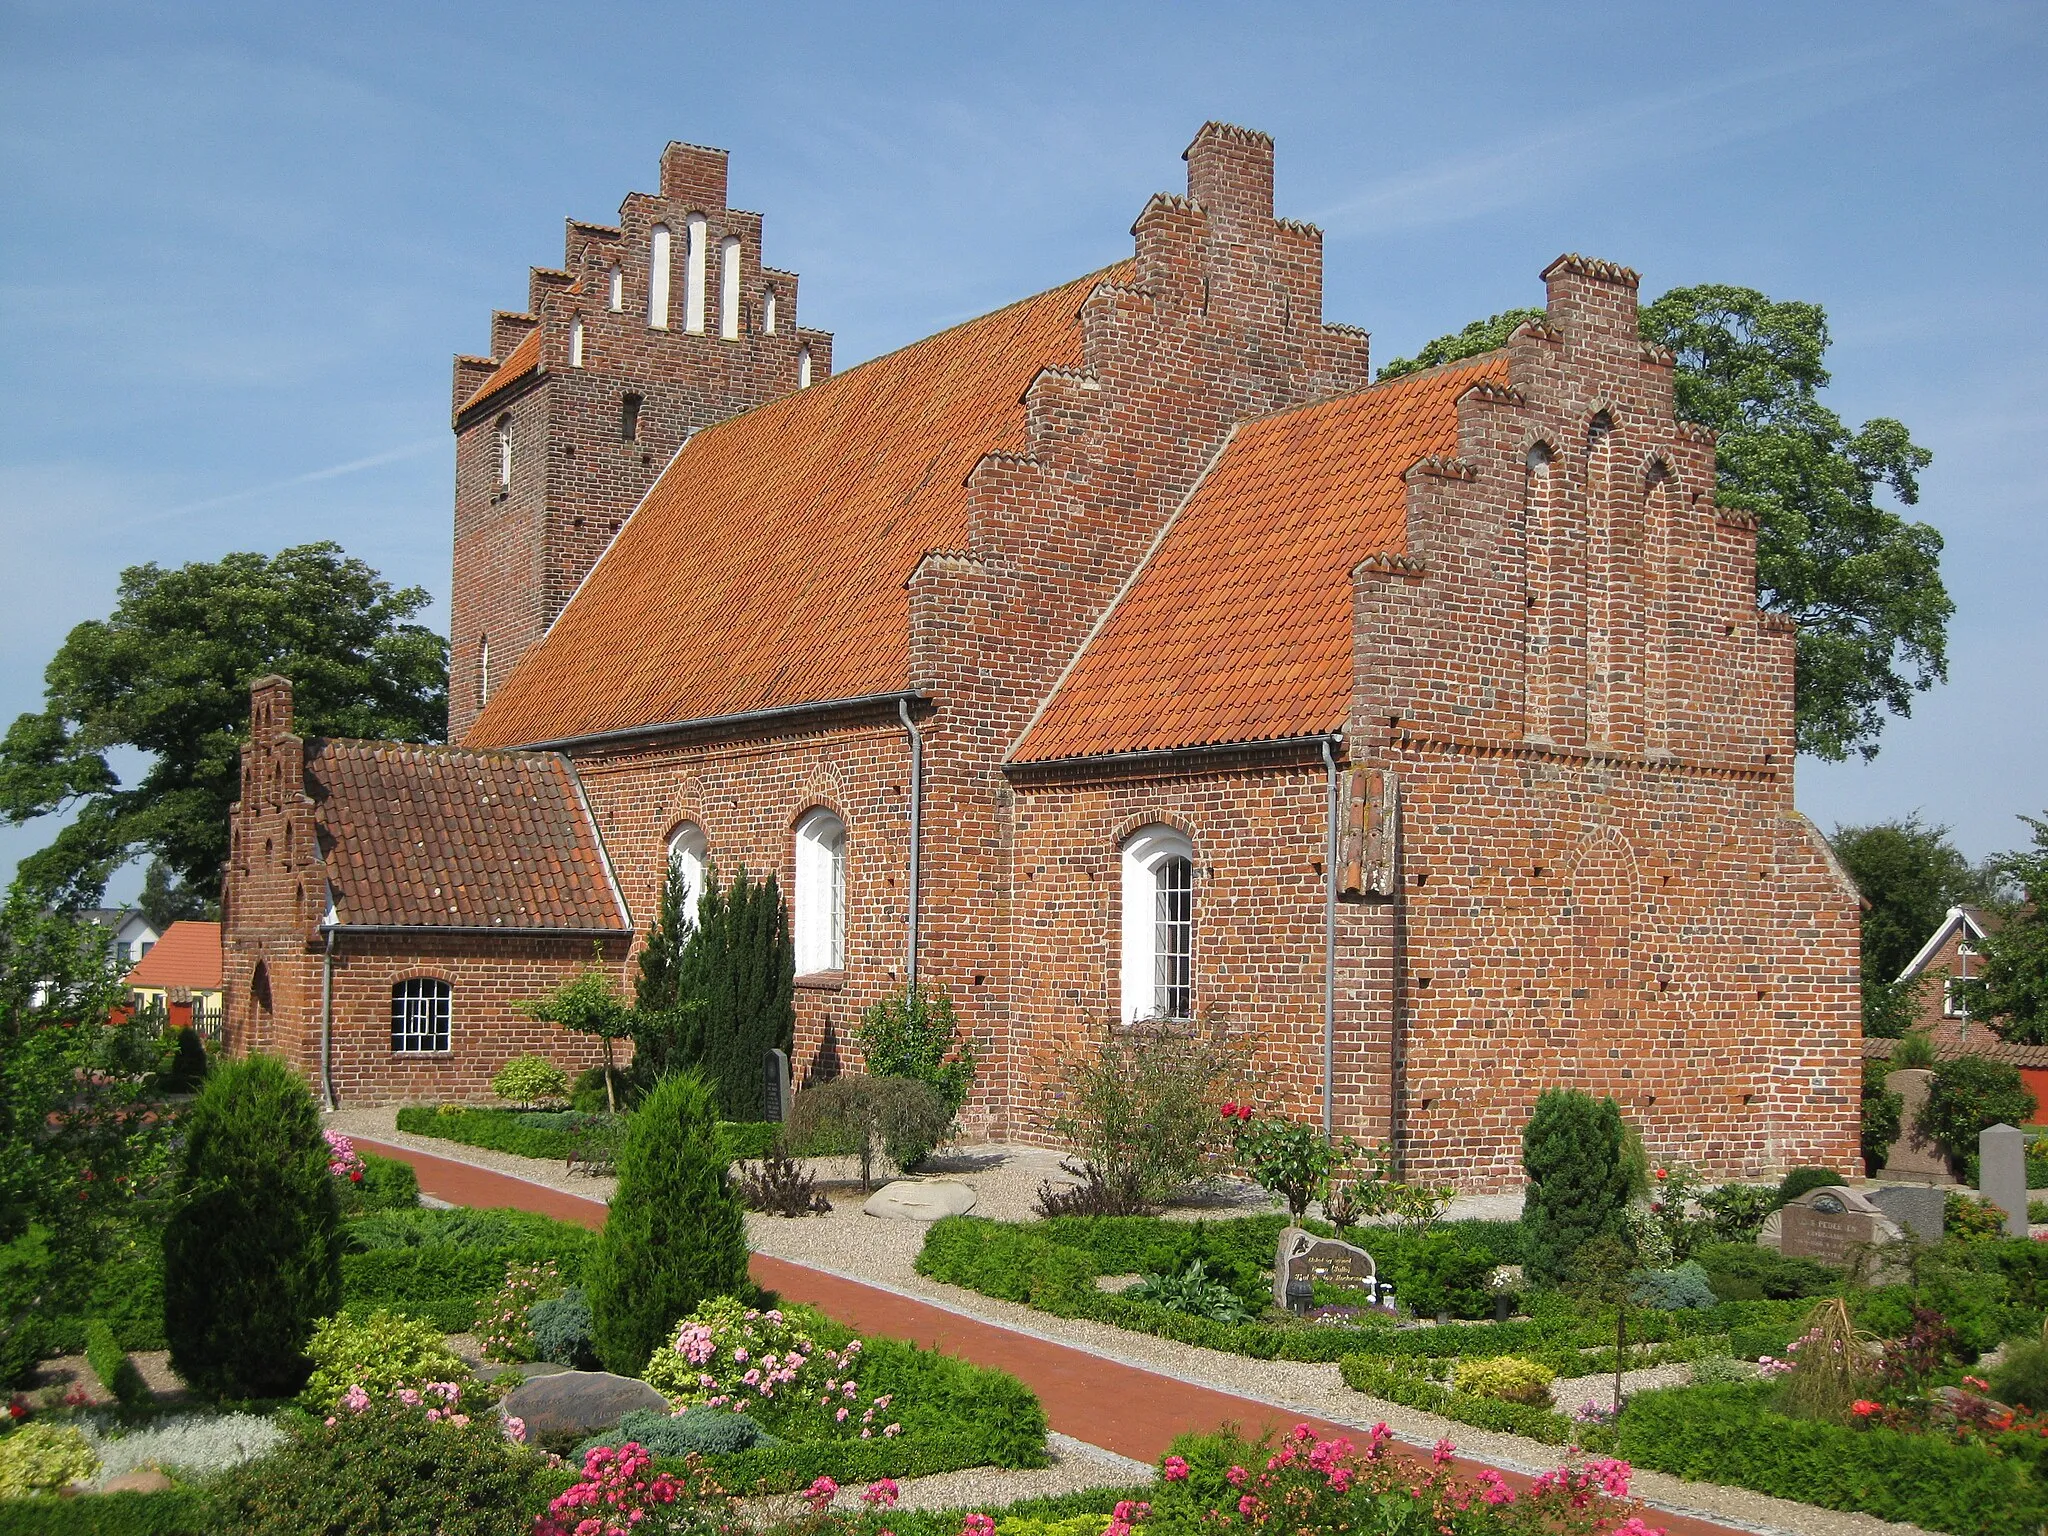 Photo showing: The church "Ørslev Kirke" in the small town "Ørslev", Vordingborg Municipality. The town is located on South Zealand in east Denmark